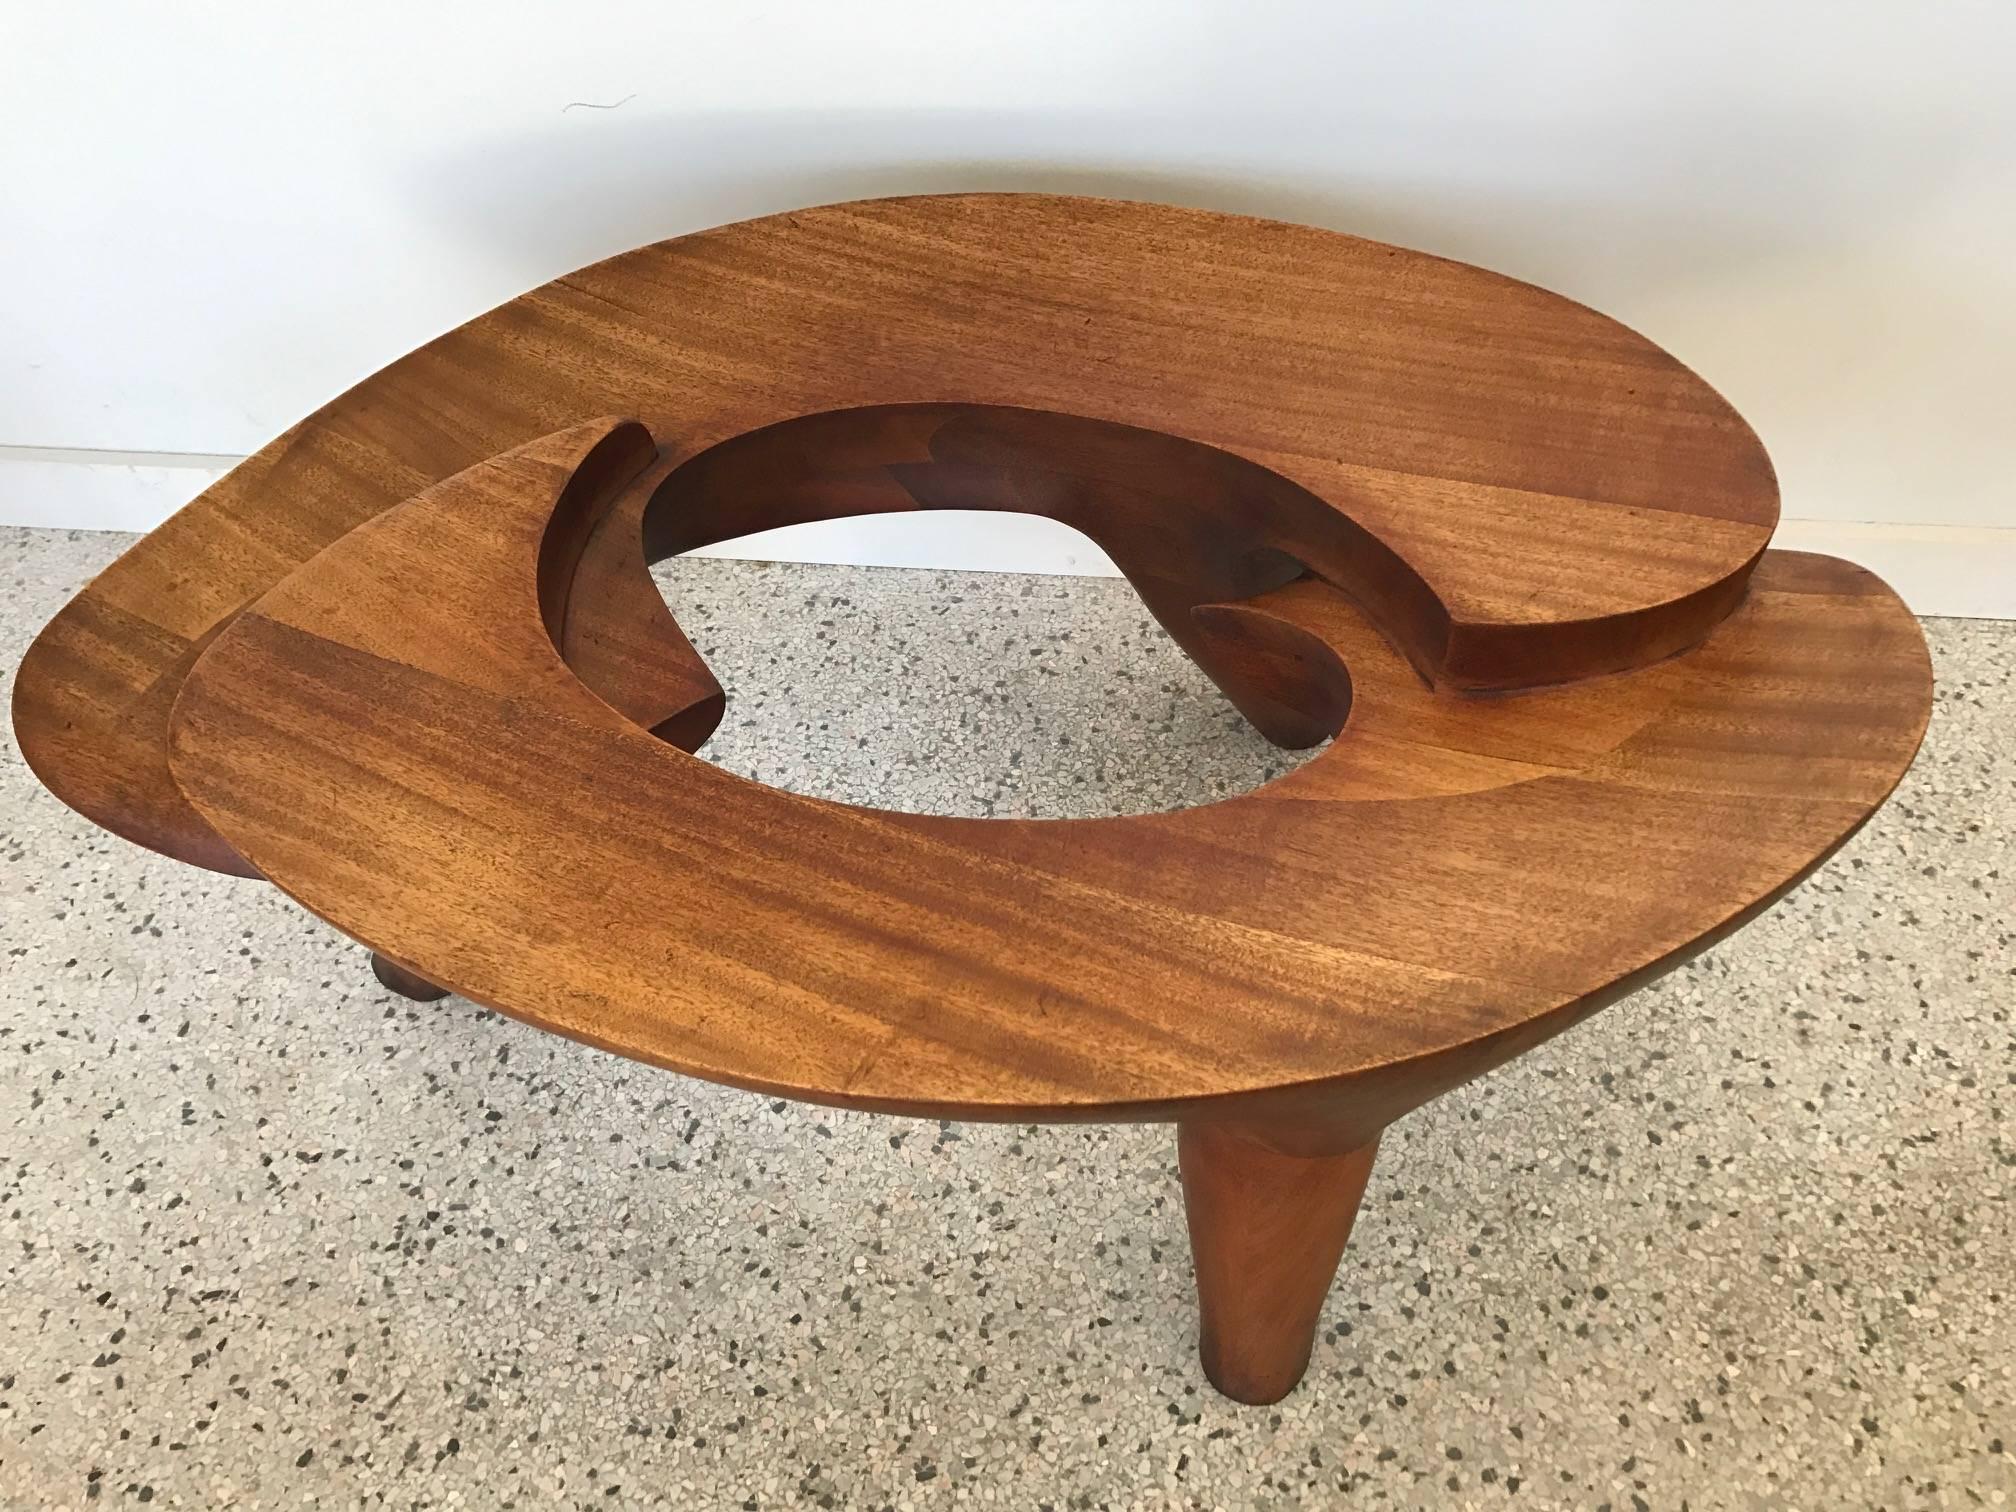 A fantastic, one-off coffee table by master studio craftsman Sam Forrest, circa 1969. Solid mahogany. Signed underneath and authenticated by the arist as one of his earliest, important pieces.